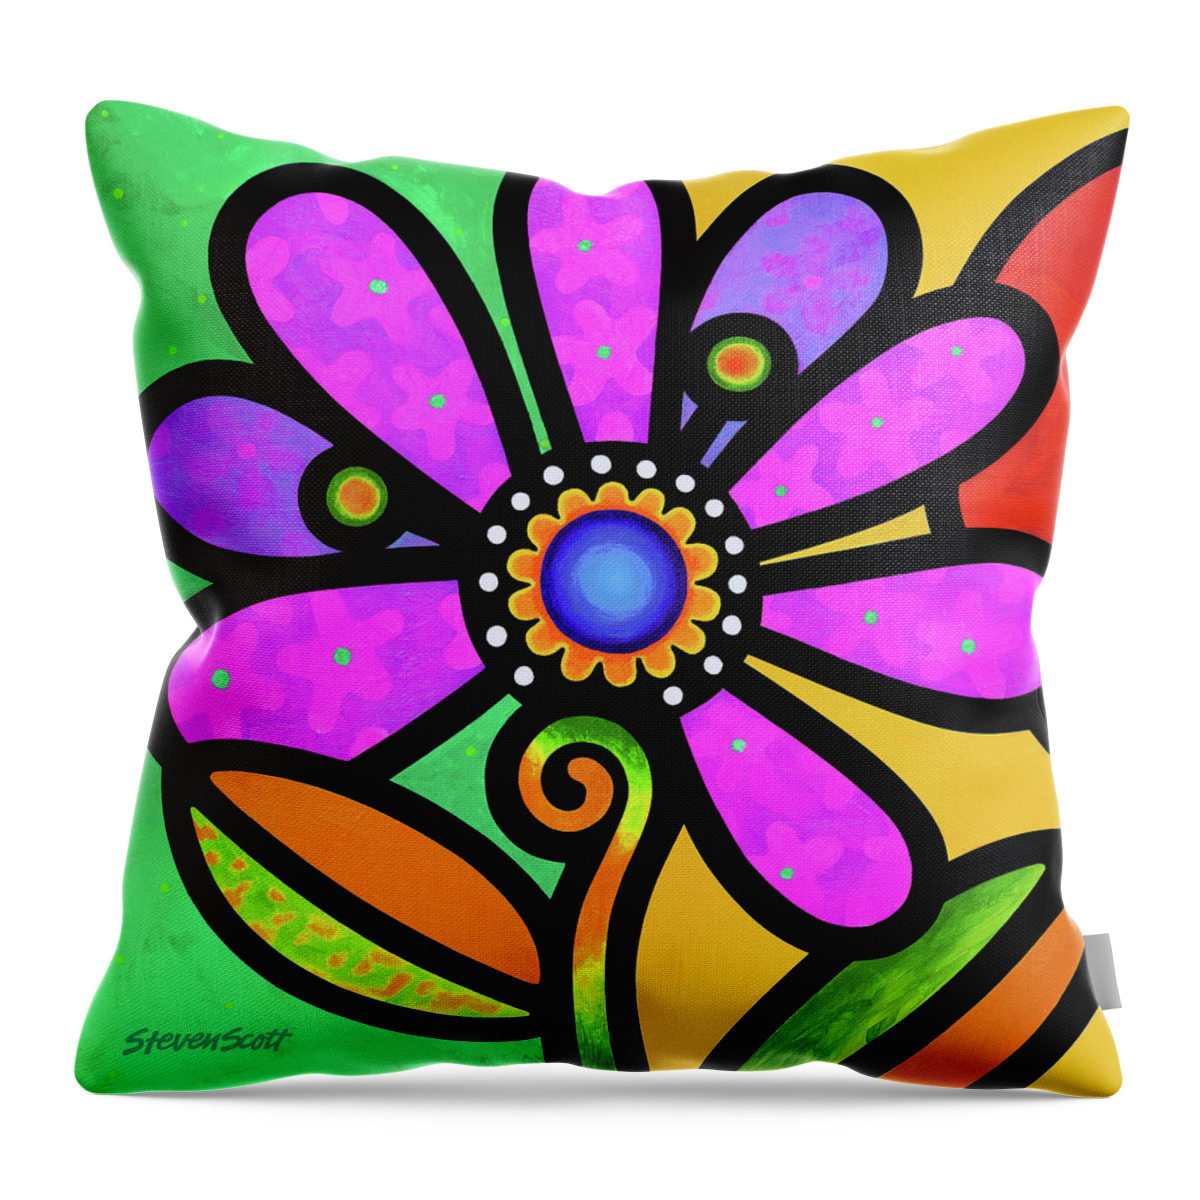 Daisy Throw Pillow featuring the painting Cosmic Daisy in Pink by Steven Scott